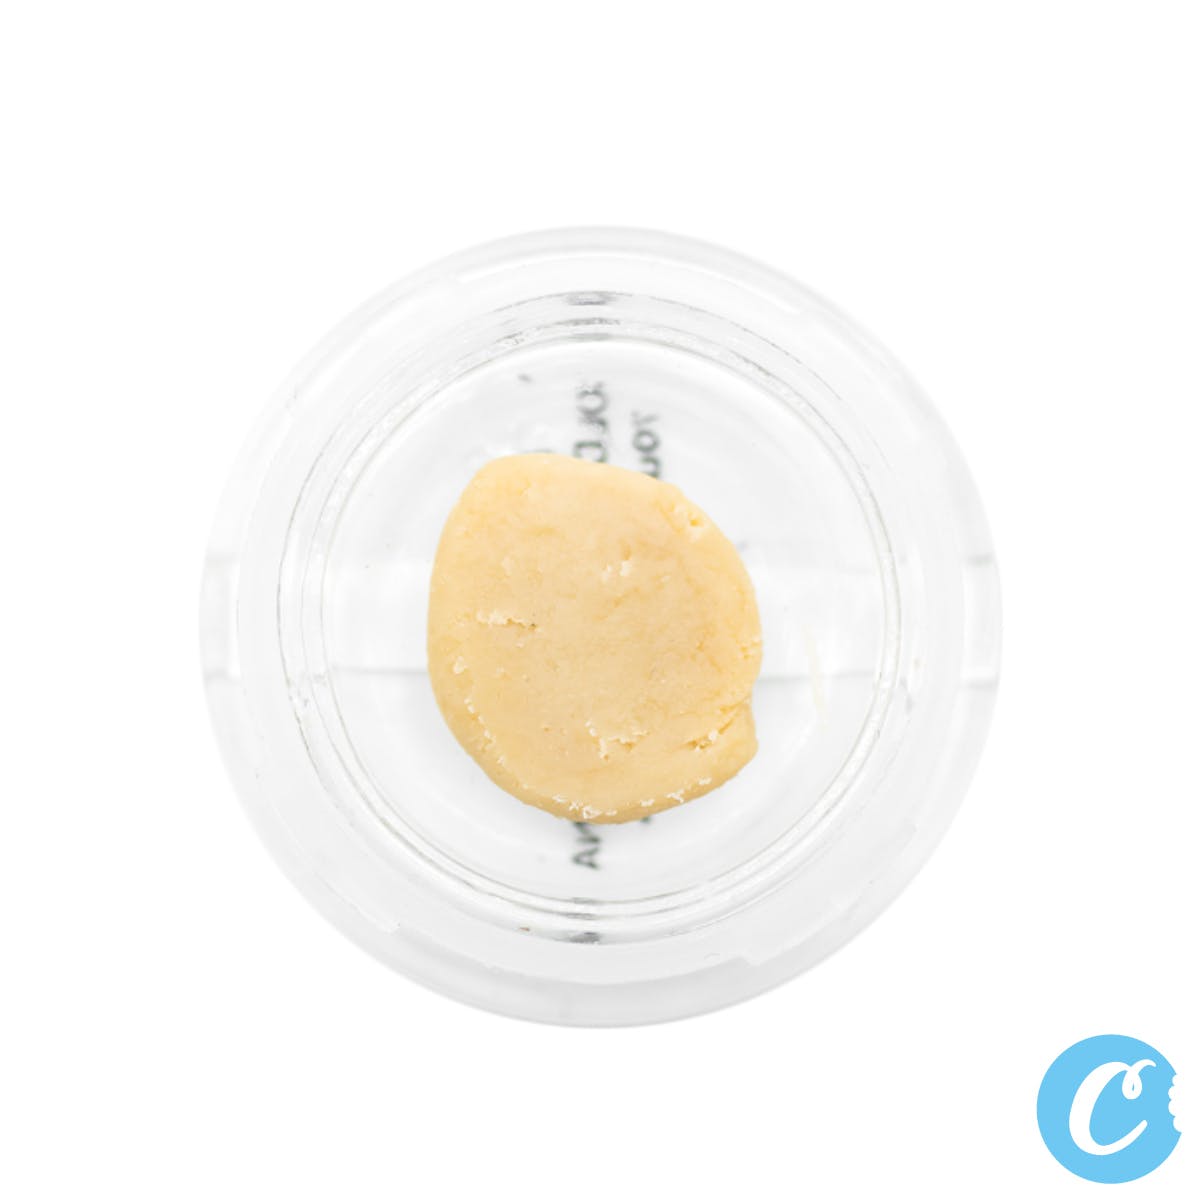 Golden State Banana Solventless Hash Rosin by Frosty